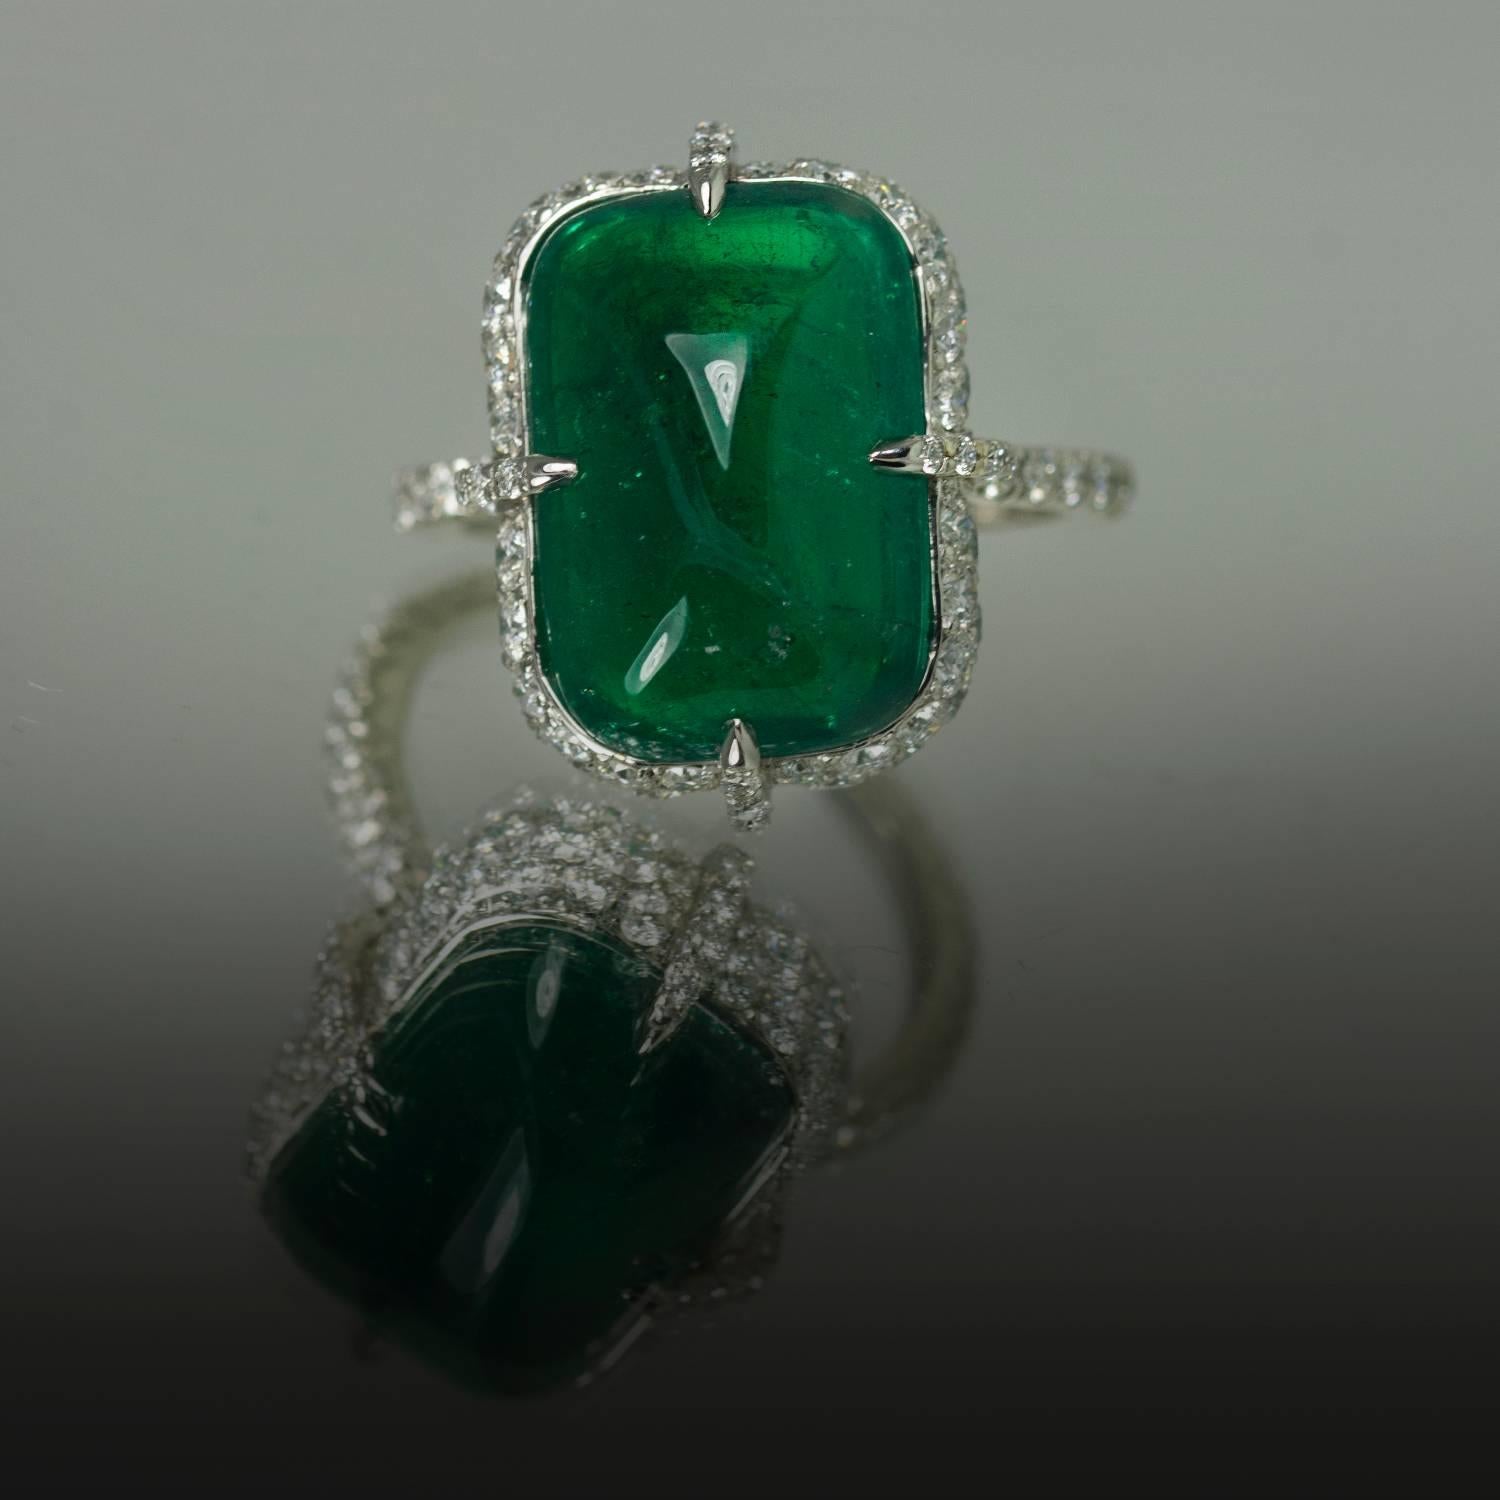 Hand fabricated platinum ring with gem quality 9.88 carat Gubelin certified cabochon cut Colombian emerald with only minor enhancement. In addition there are 2.98 carats of collection color clarity pave set diamonds. 